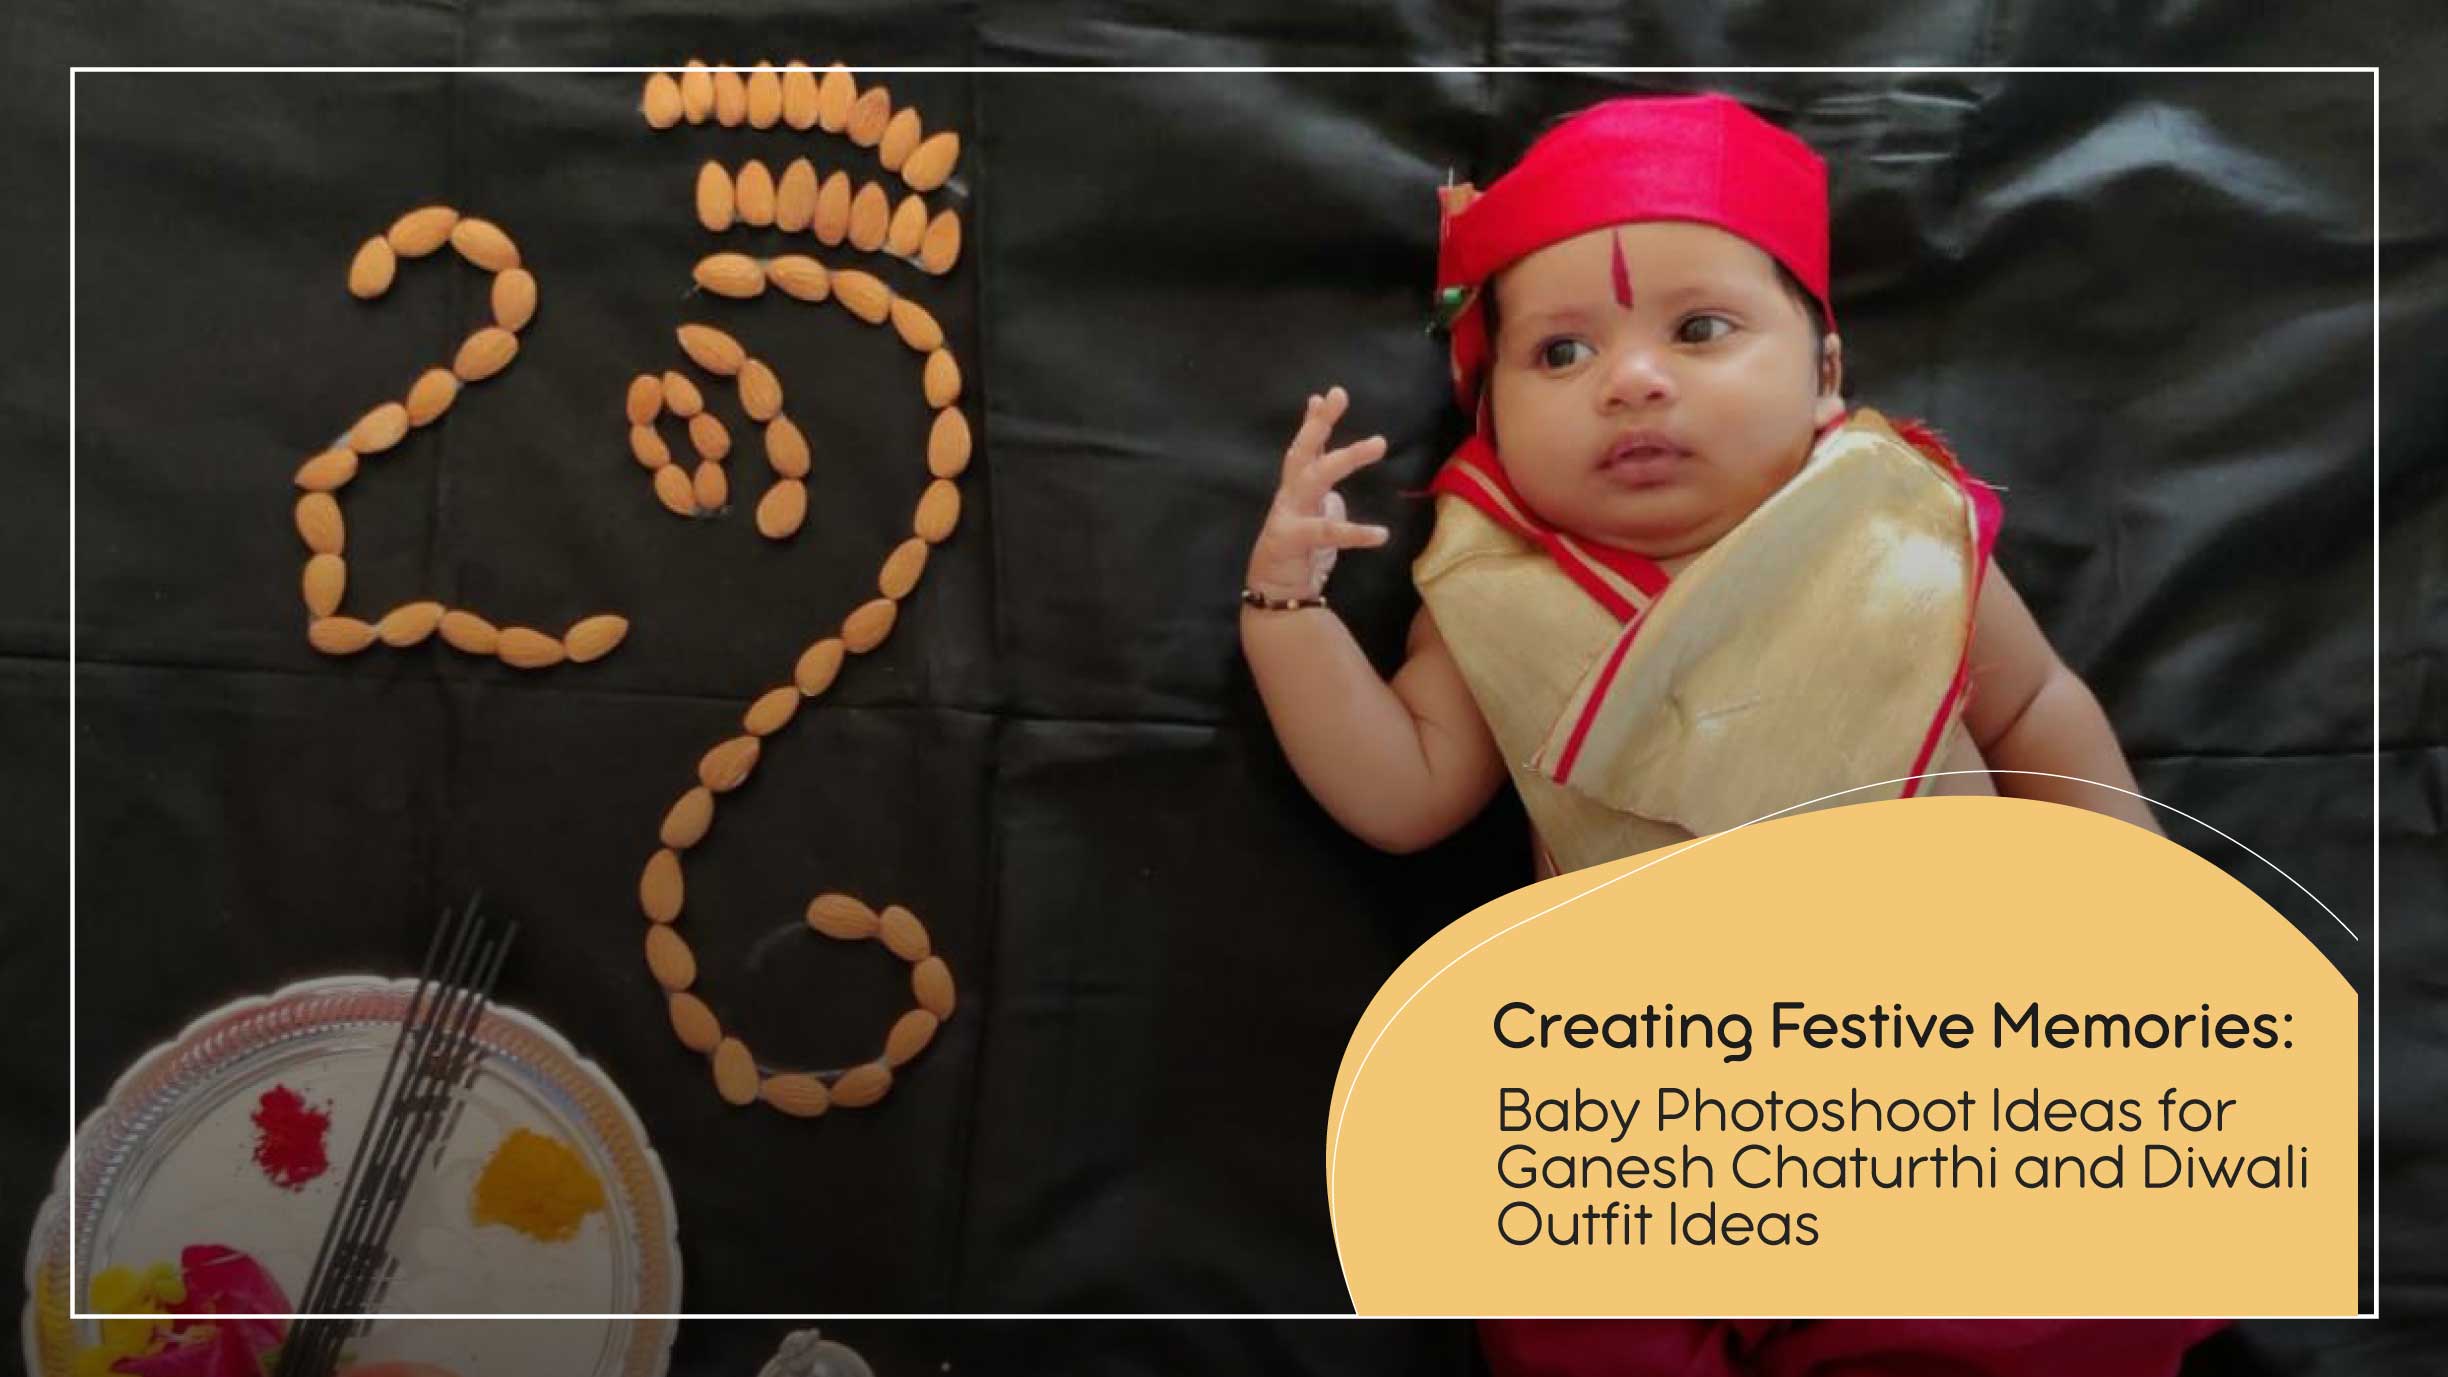 Creating Festive Memories: Baby Photoshoot Ideas for Ganesh Chaturthi and Diwali